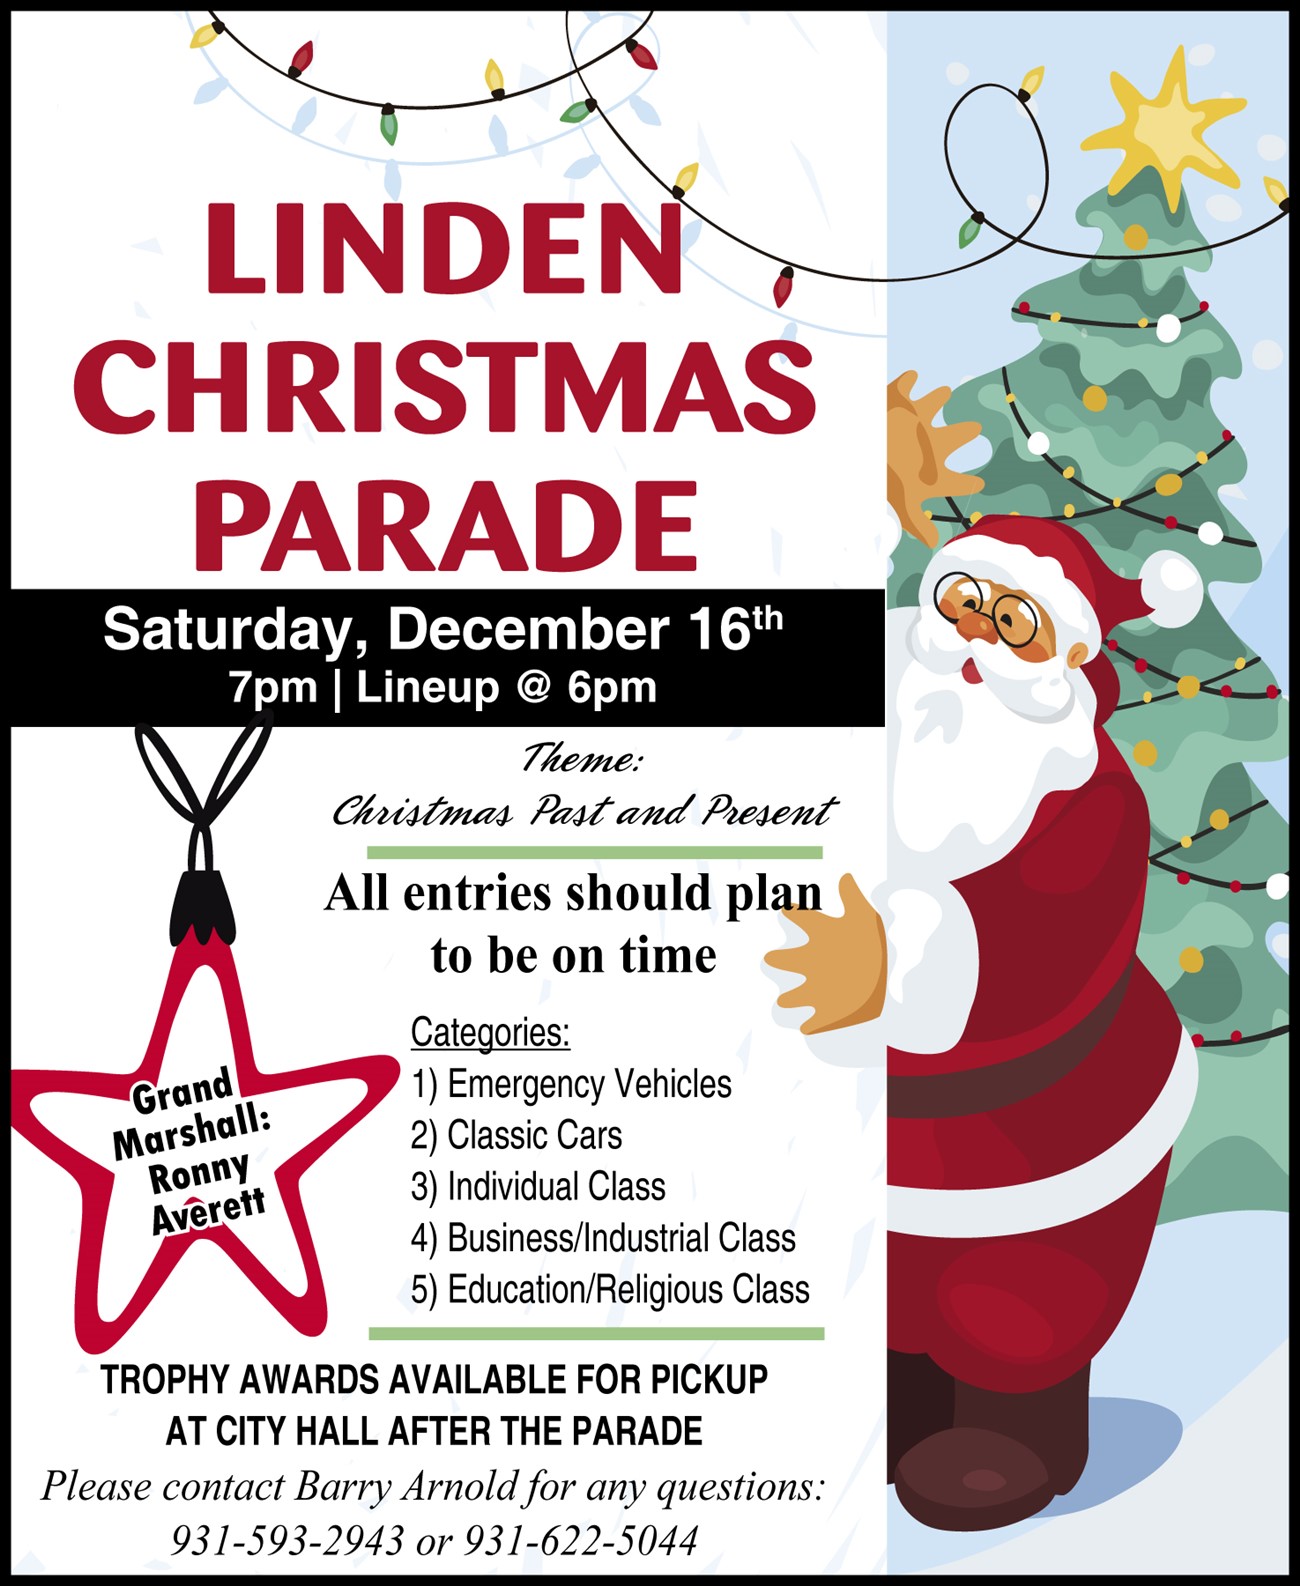 Linden Christmas Parade, brought to us by the Shriners